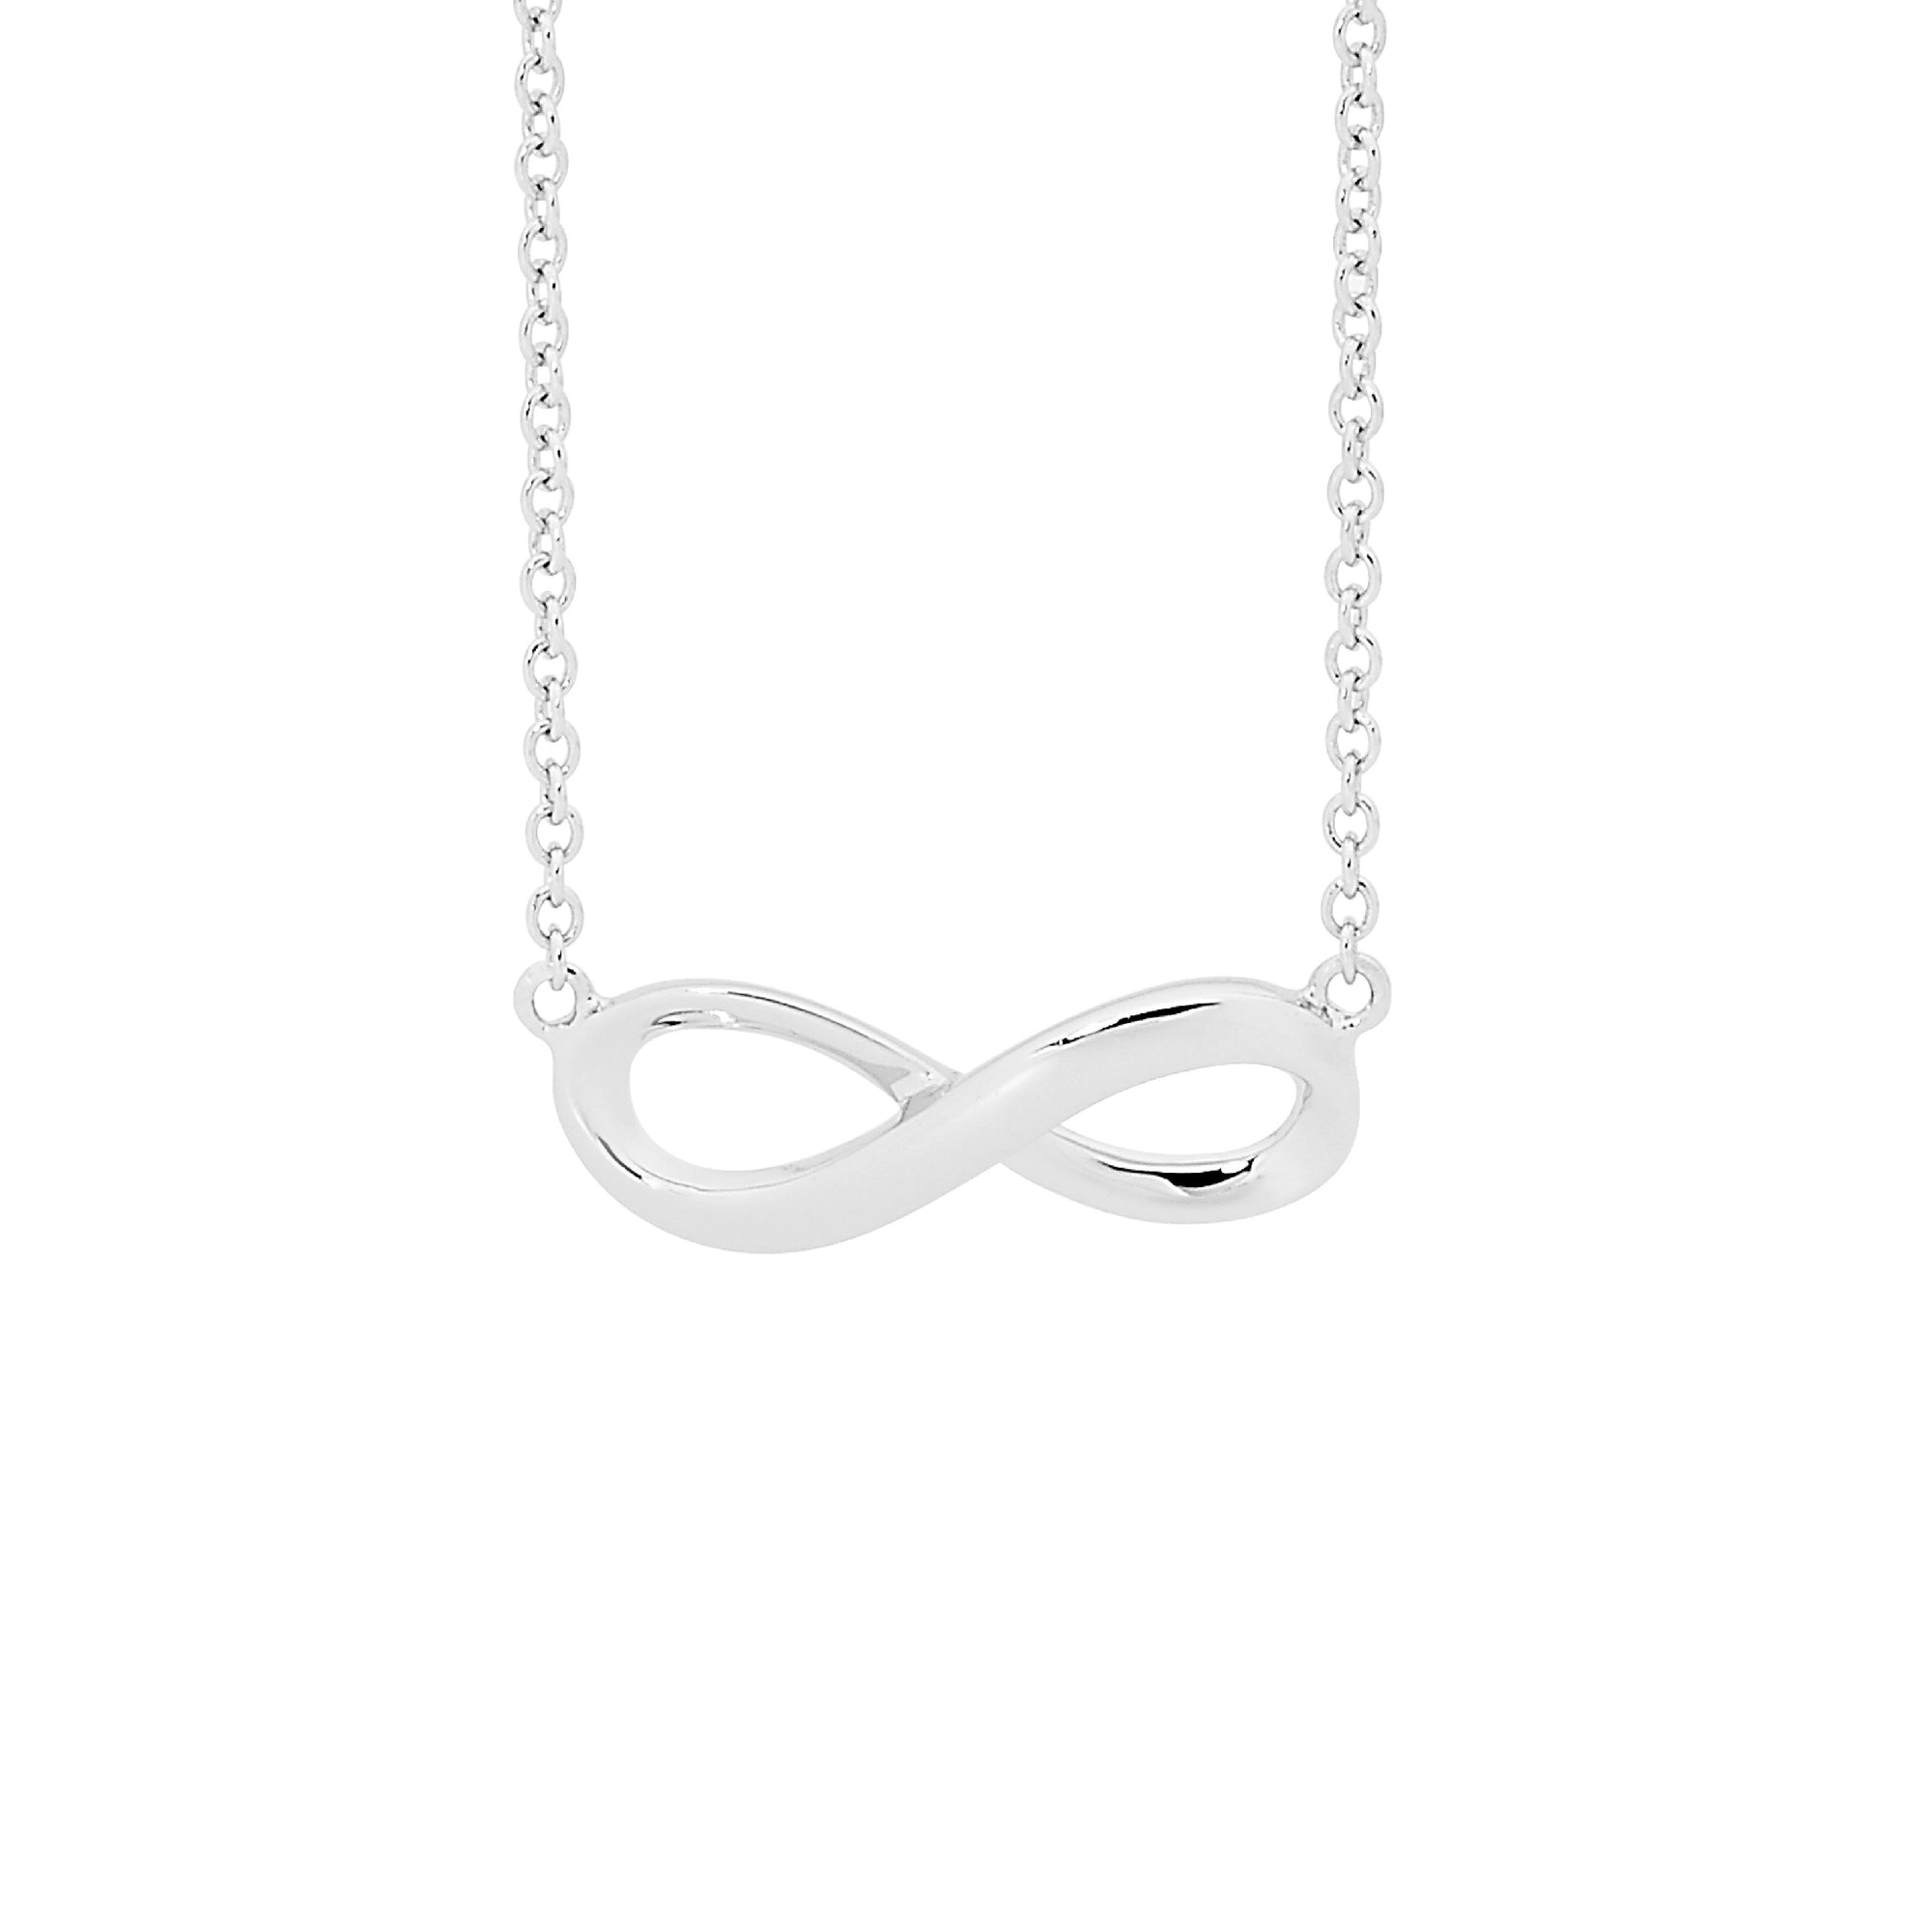 STERLING SILVER INFINITY NECKLACE